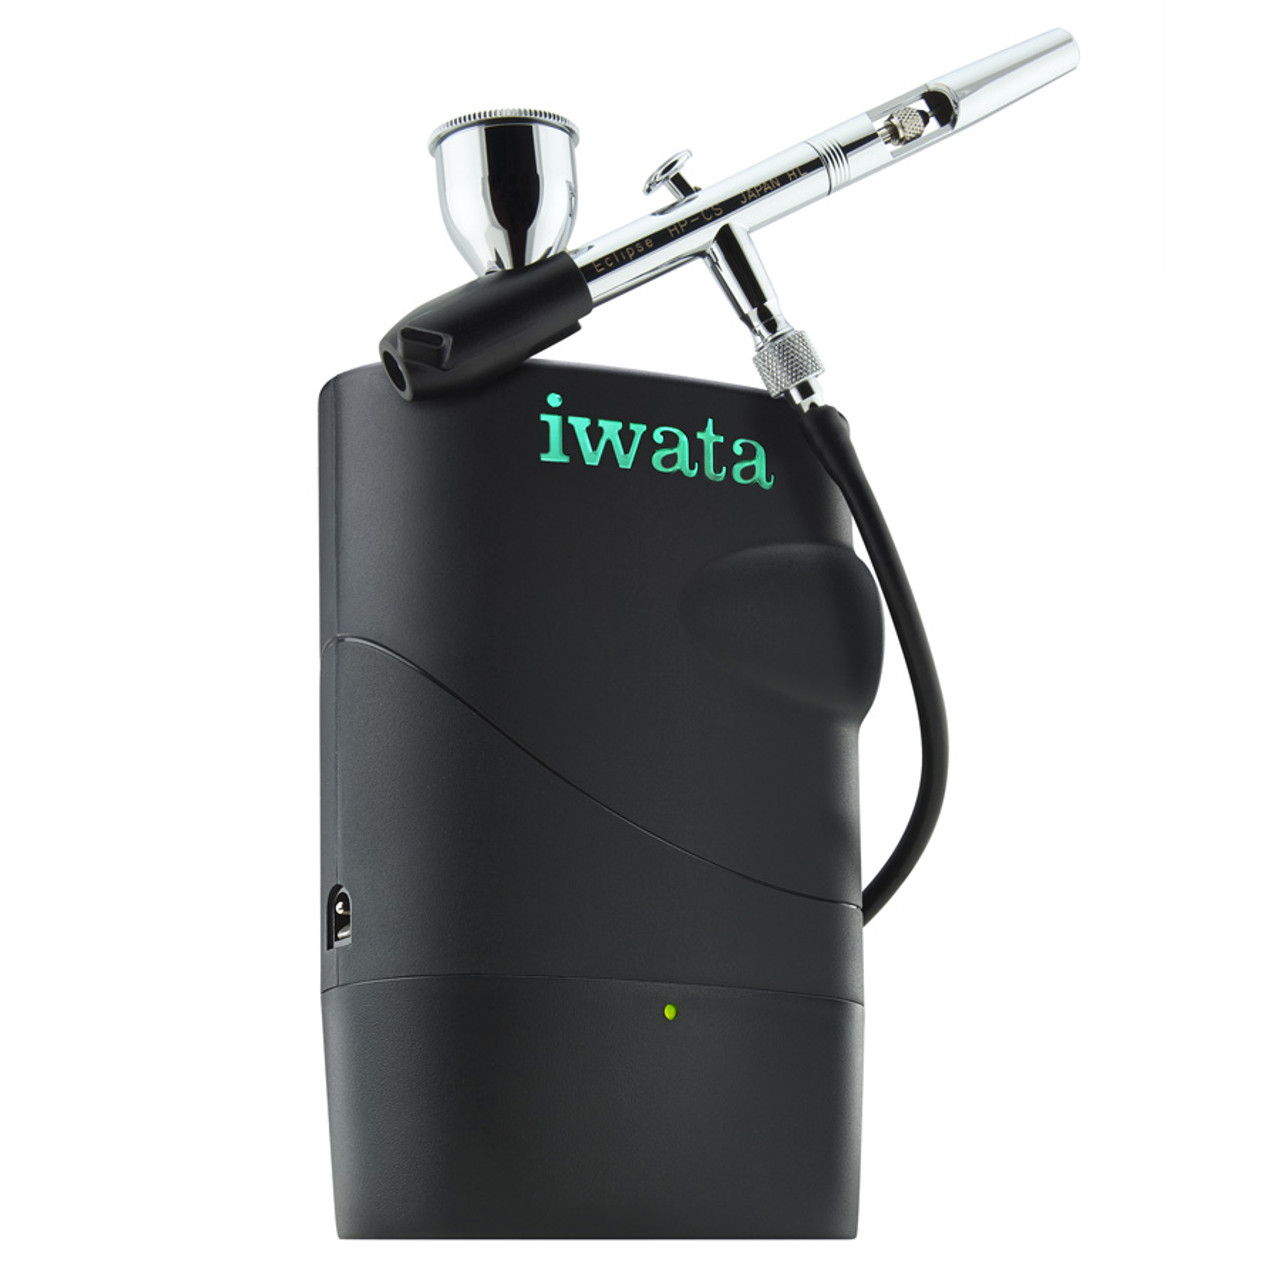 Iwata Freestyle Air Airbrush Battery Compressor - Norcostco, Inc.